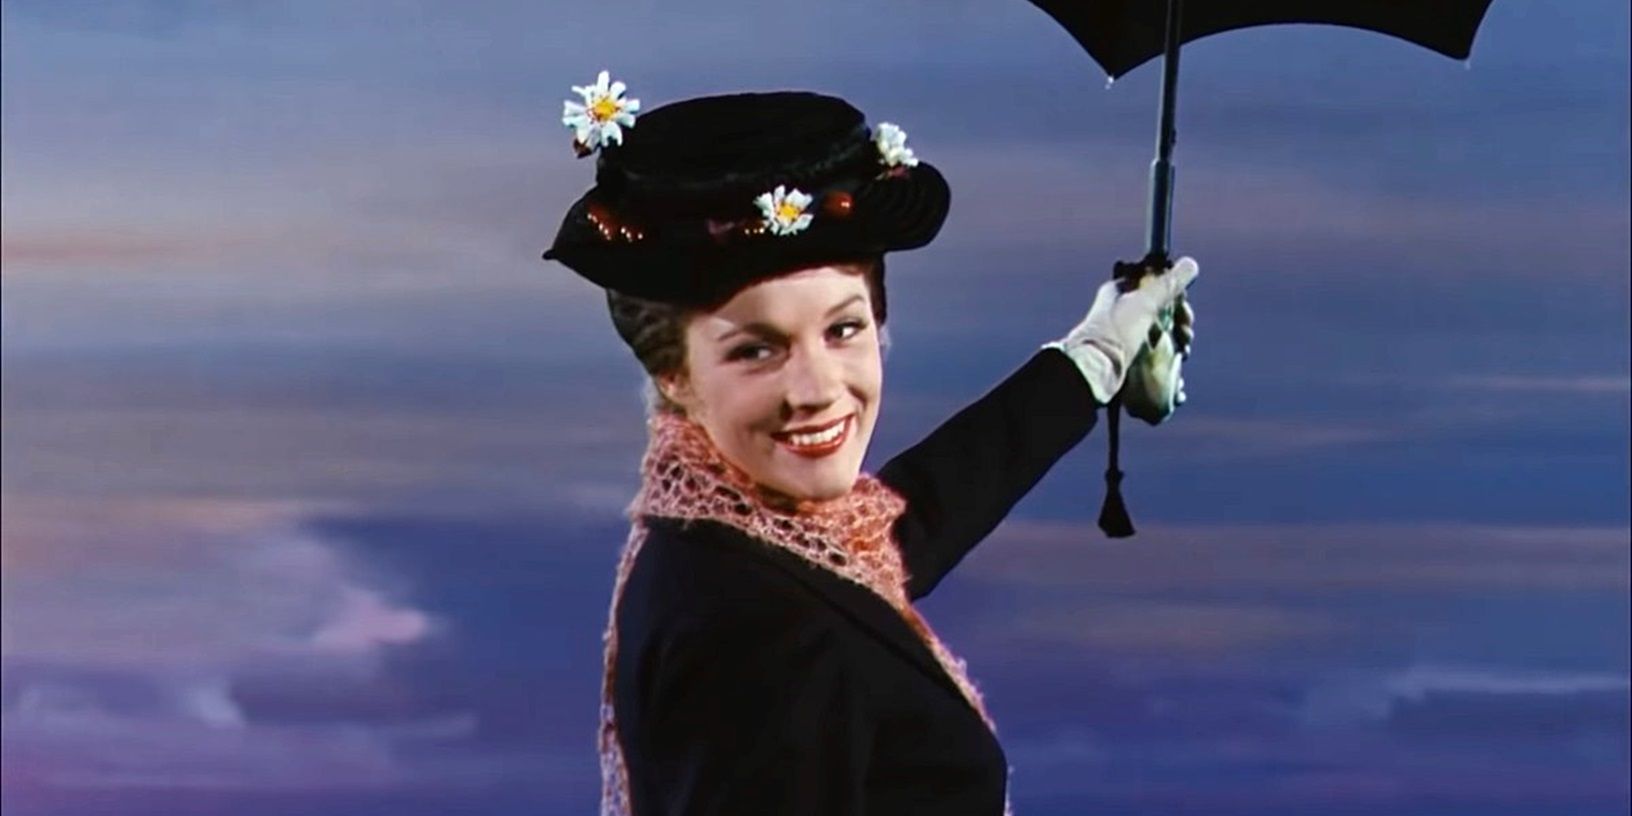 Julie Andrew's as Mary Poppins with a flying umbrella